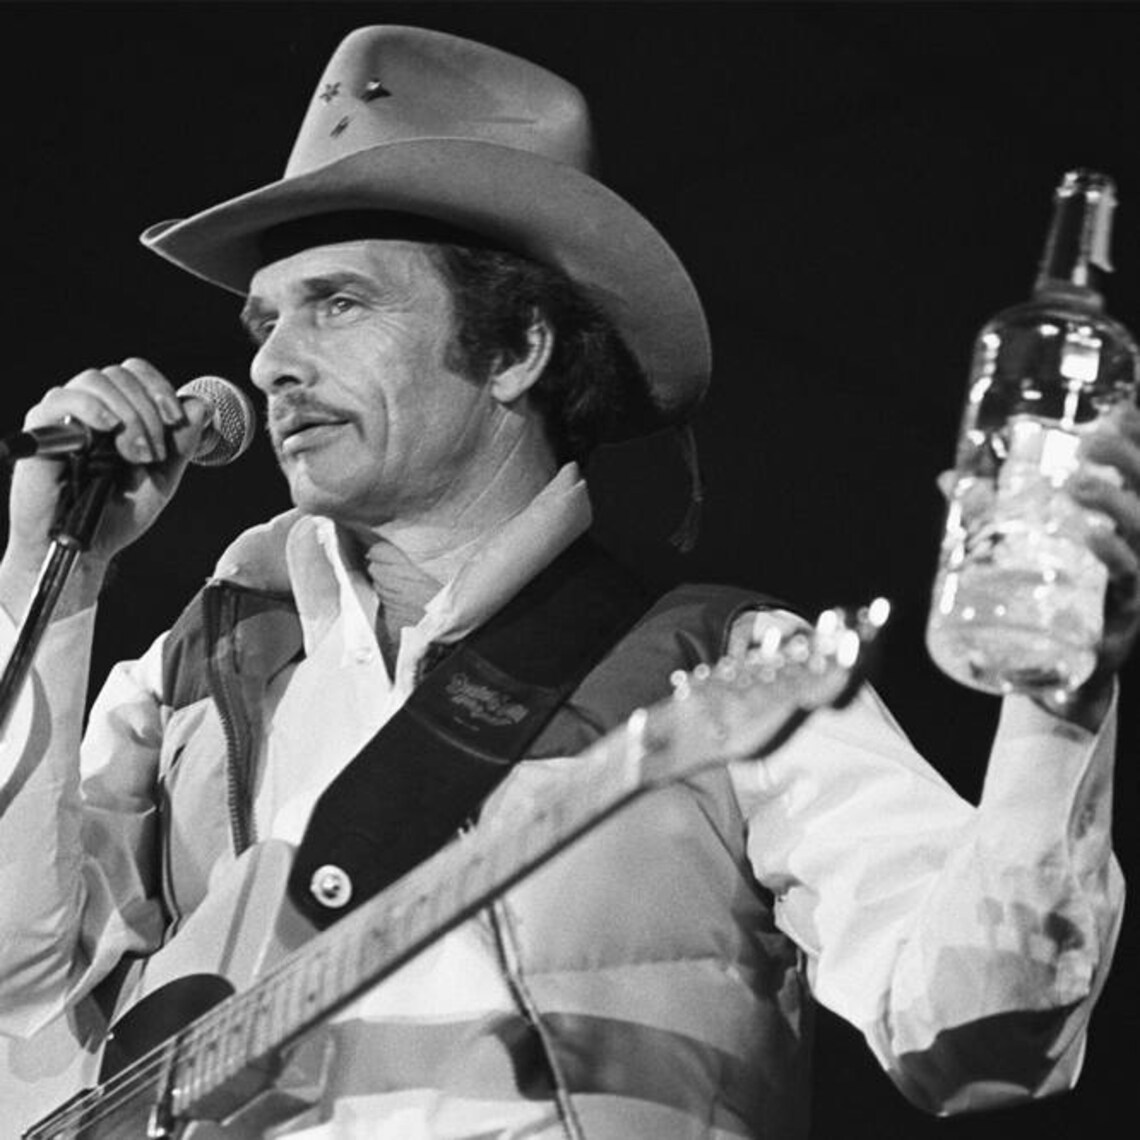 Merle Haggard I Think I'll Just Stay Here and Drink Hank - Etsy